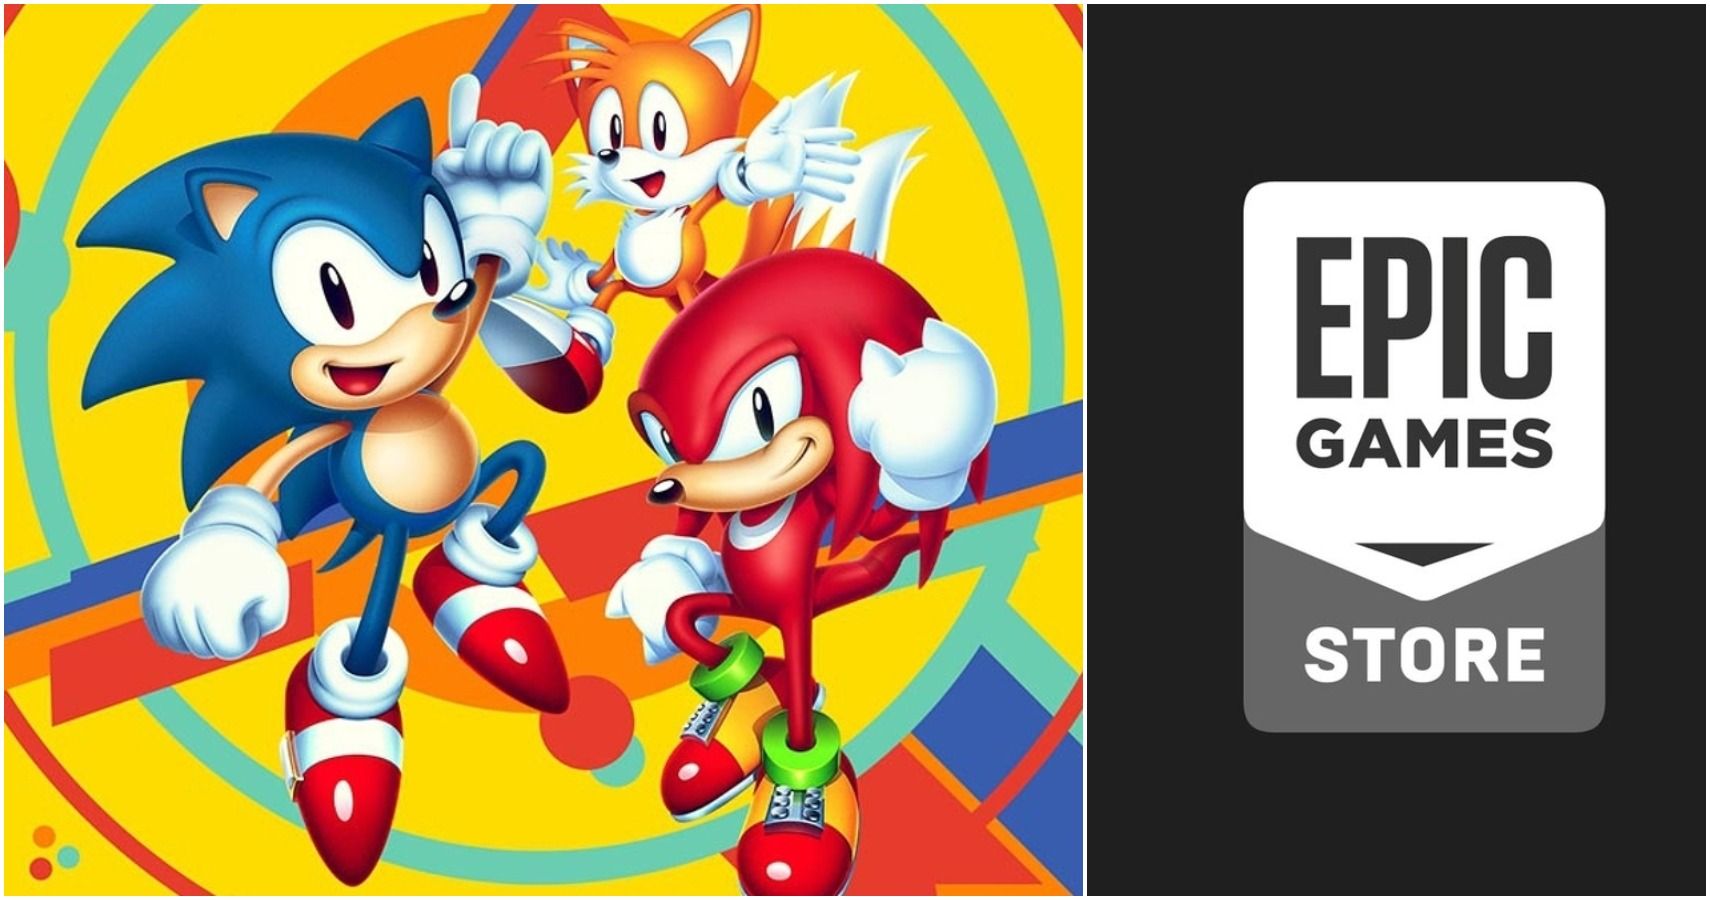 Sonic Mania is currently free on the Epic Games Store